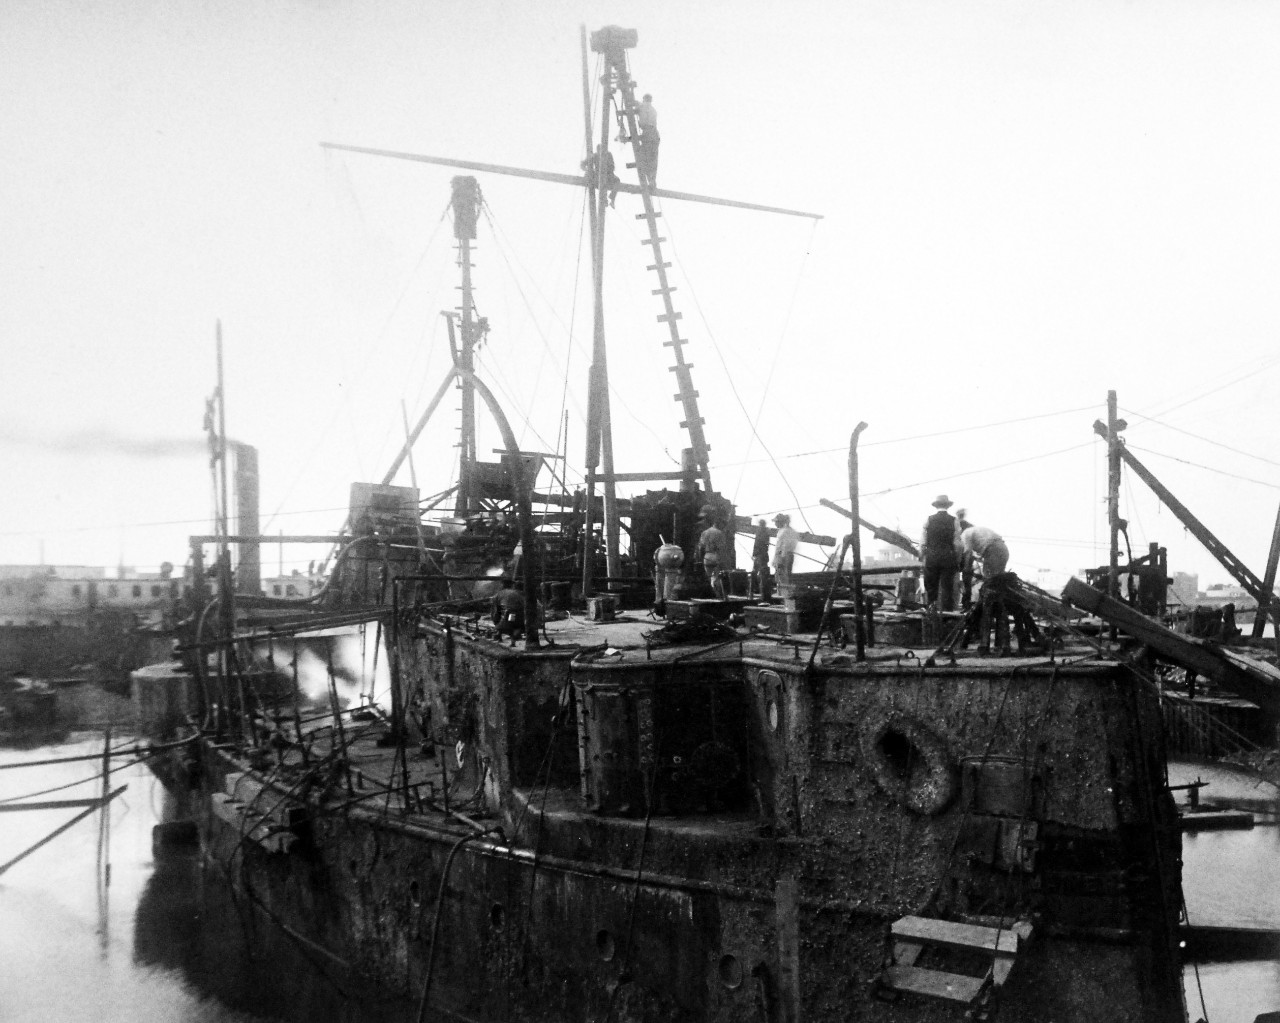 LC-Lot 8936-48:  USS Maine (1895-98), 1912.   Raising Maine’s wreck in Havana Harbor, Cuba, February 11, 1912.  Shown: stern of the wreck.   Maine exploded on February 15, 1898, and was one of the causes for the United States to enter war with Spain, Spanish-American War, April-August 1898.  Transfer from the War Department, Washington.  Courtesy of the Library of Congress.   (2015/10/2).